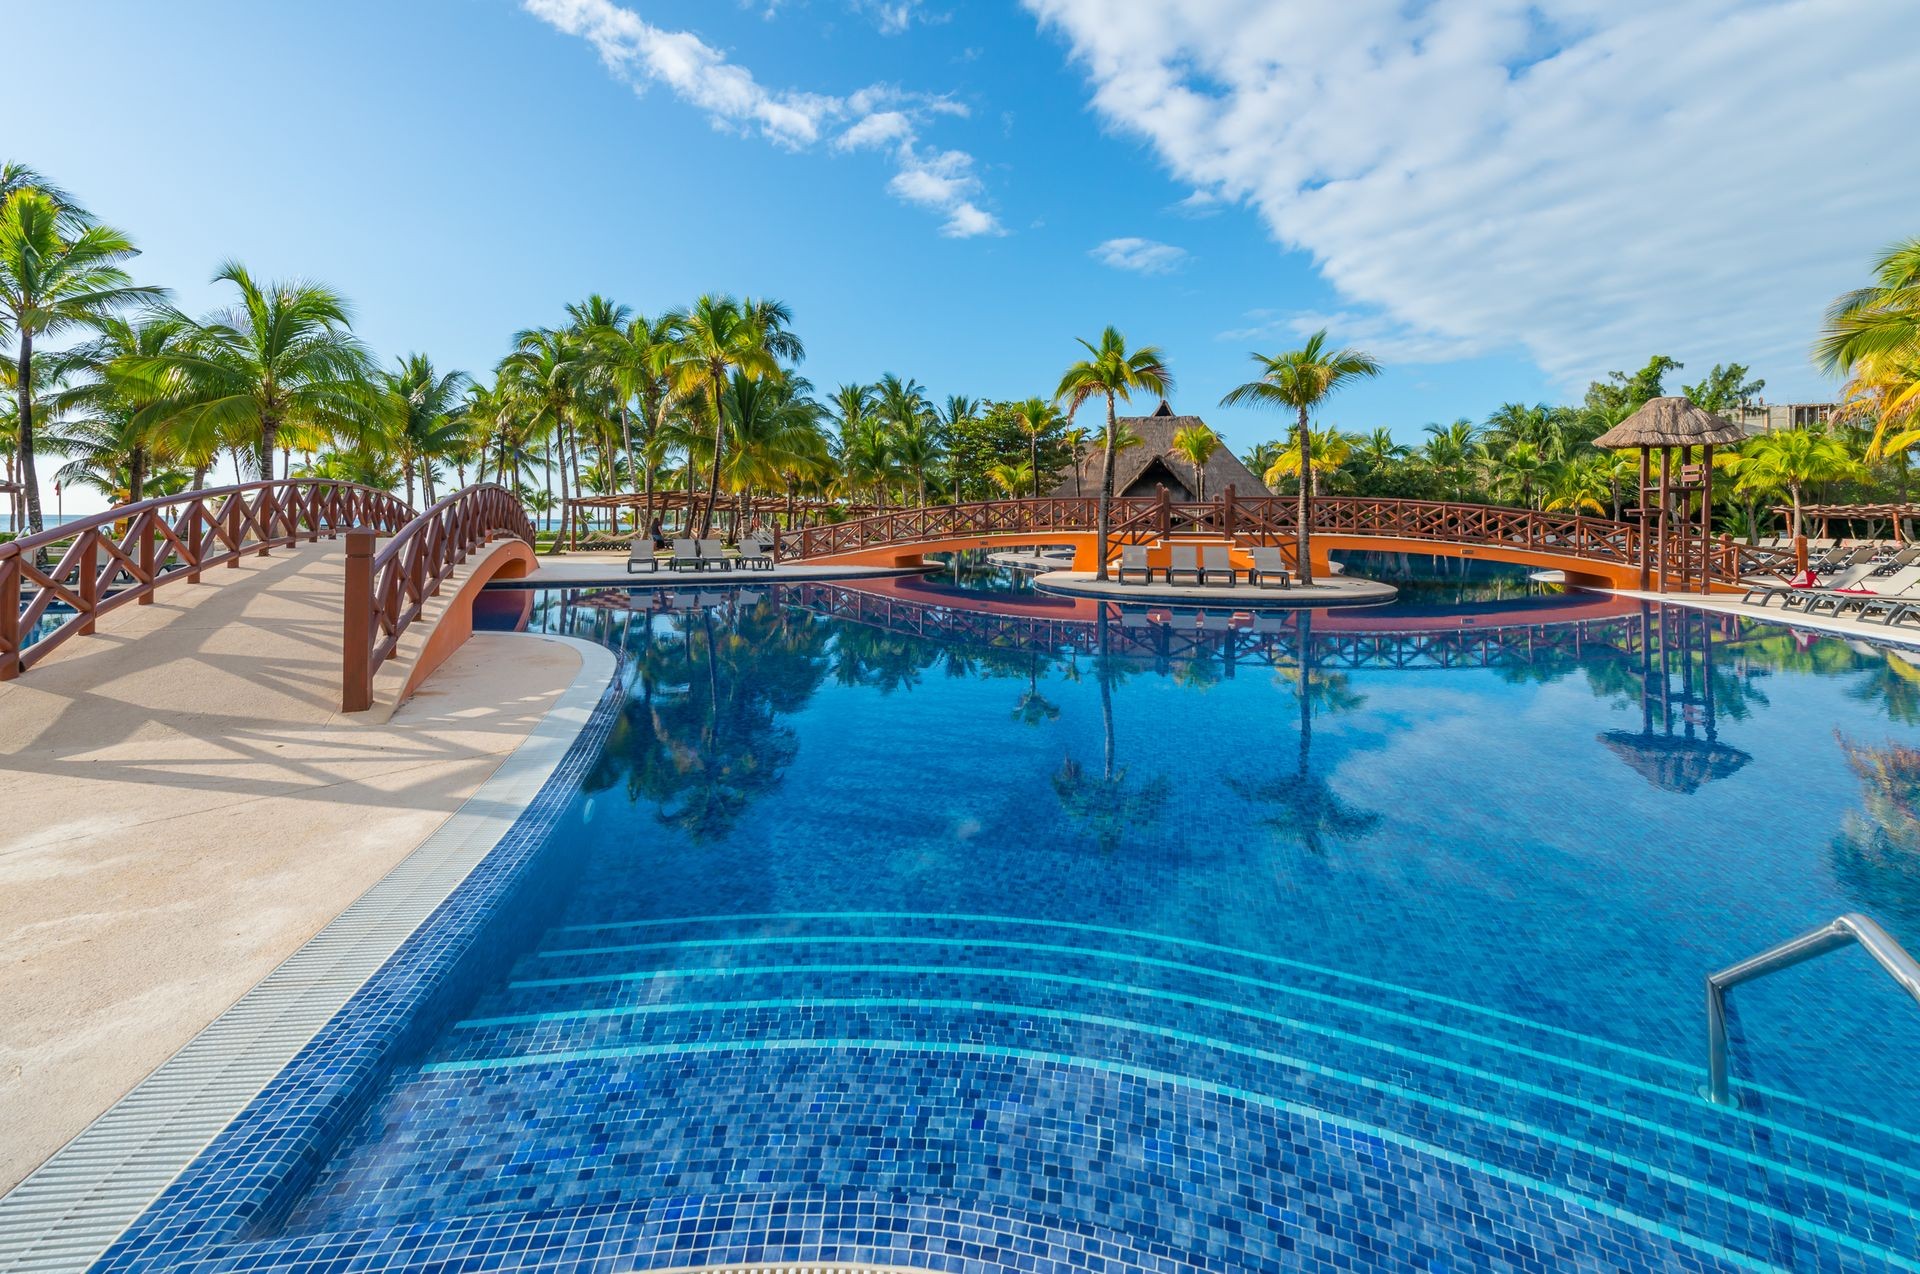 Swimming pool at the luxury tropical resort.